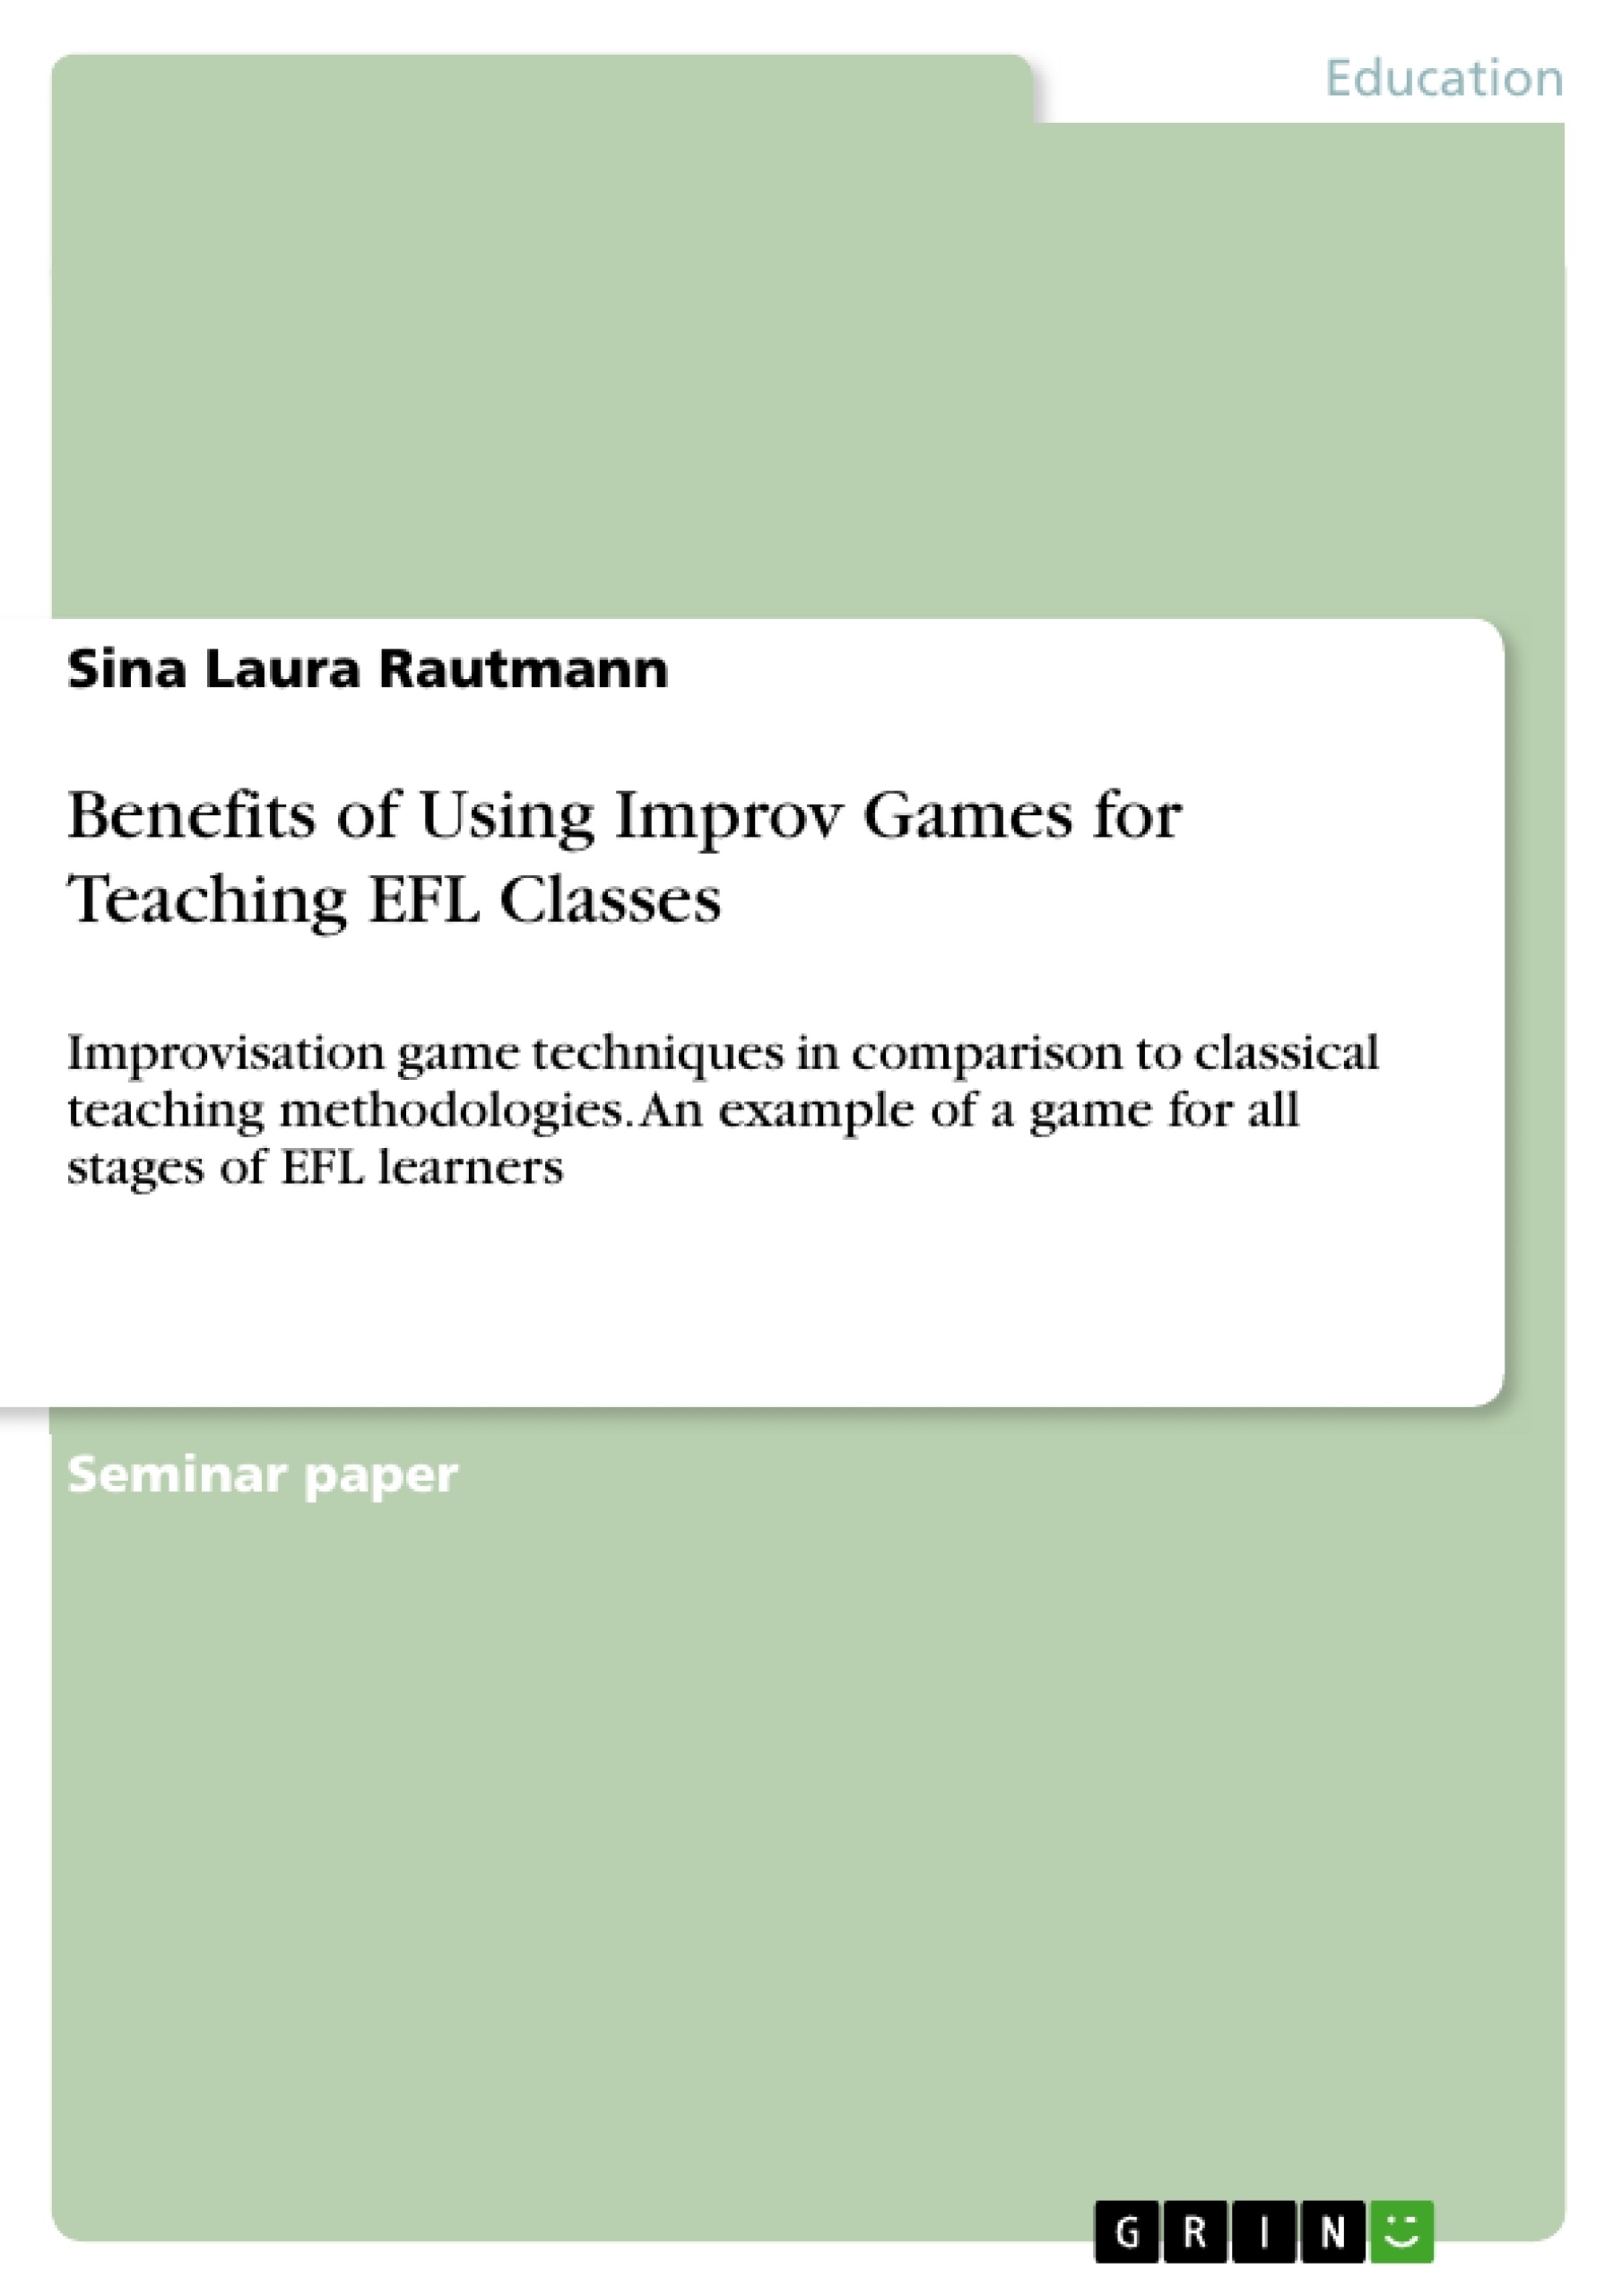 Título: Benefits of Using Improv Games for Teaching EFL Classes